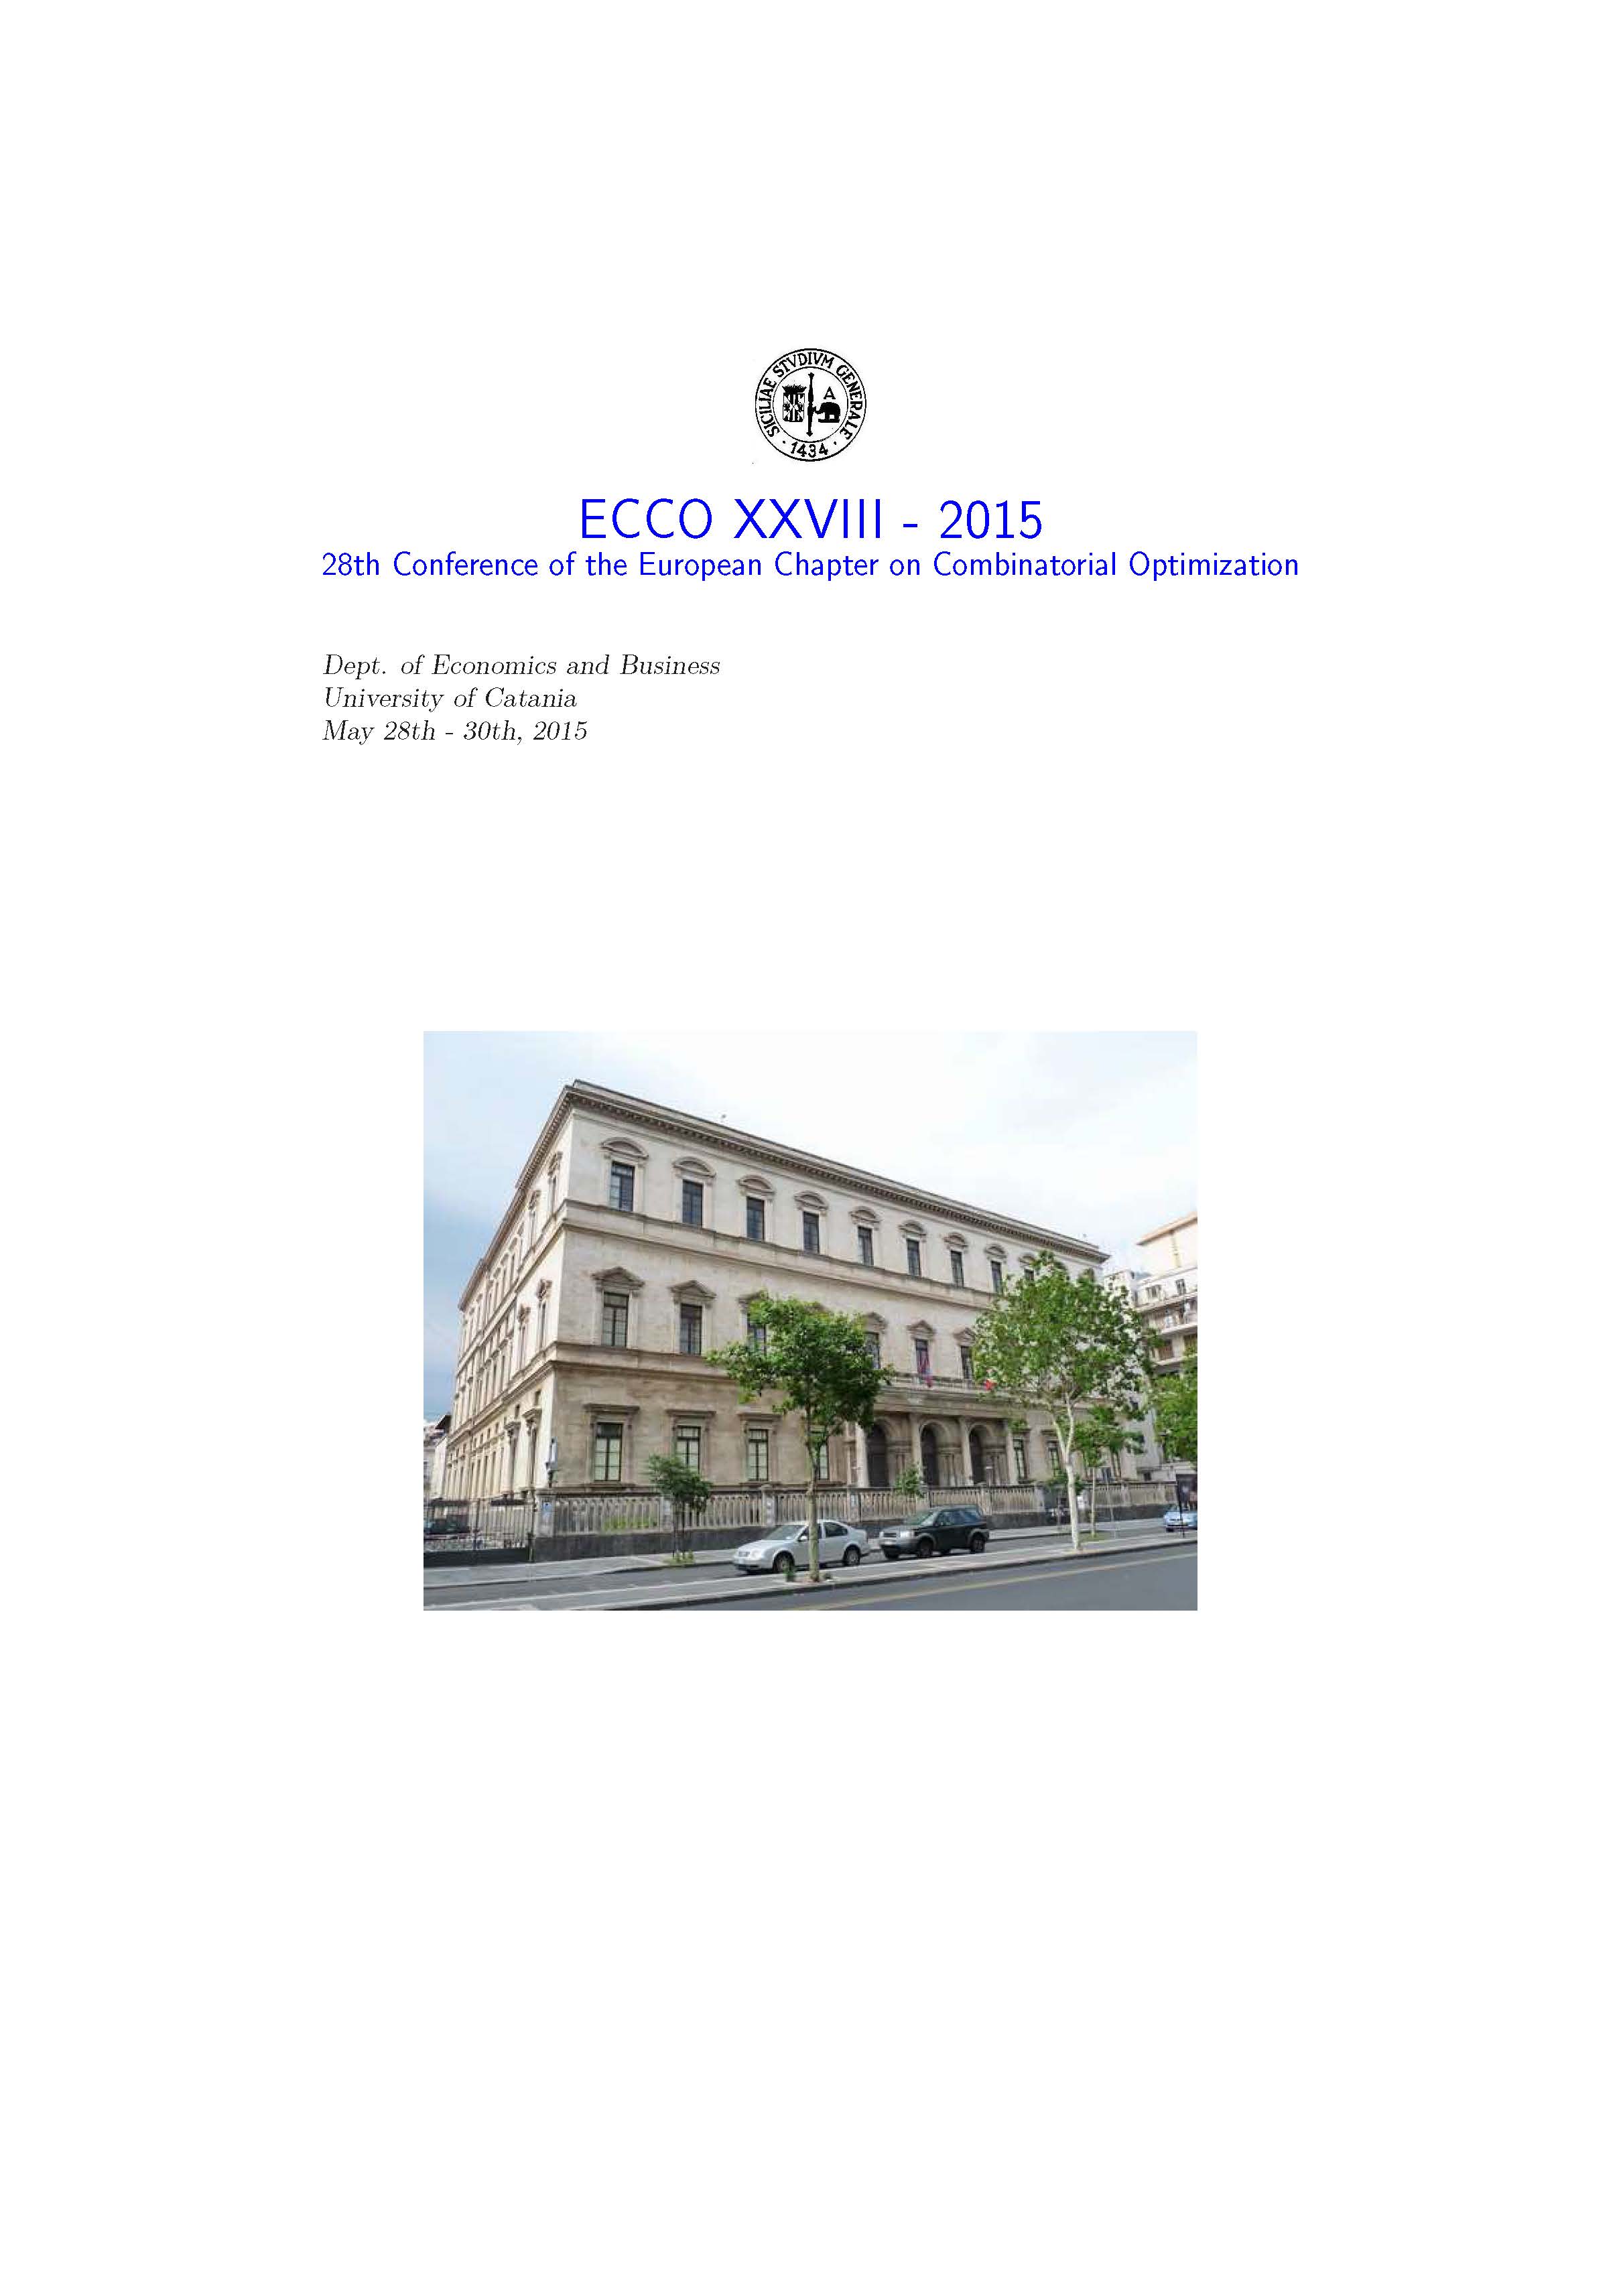 28th Conference of the European Chapter on Combinatorial Optimization